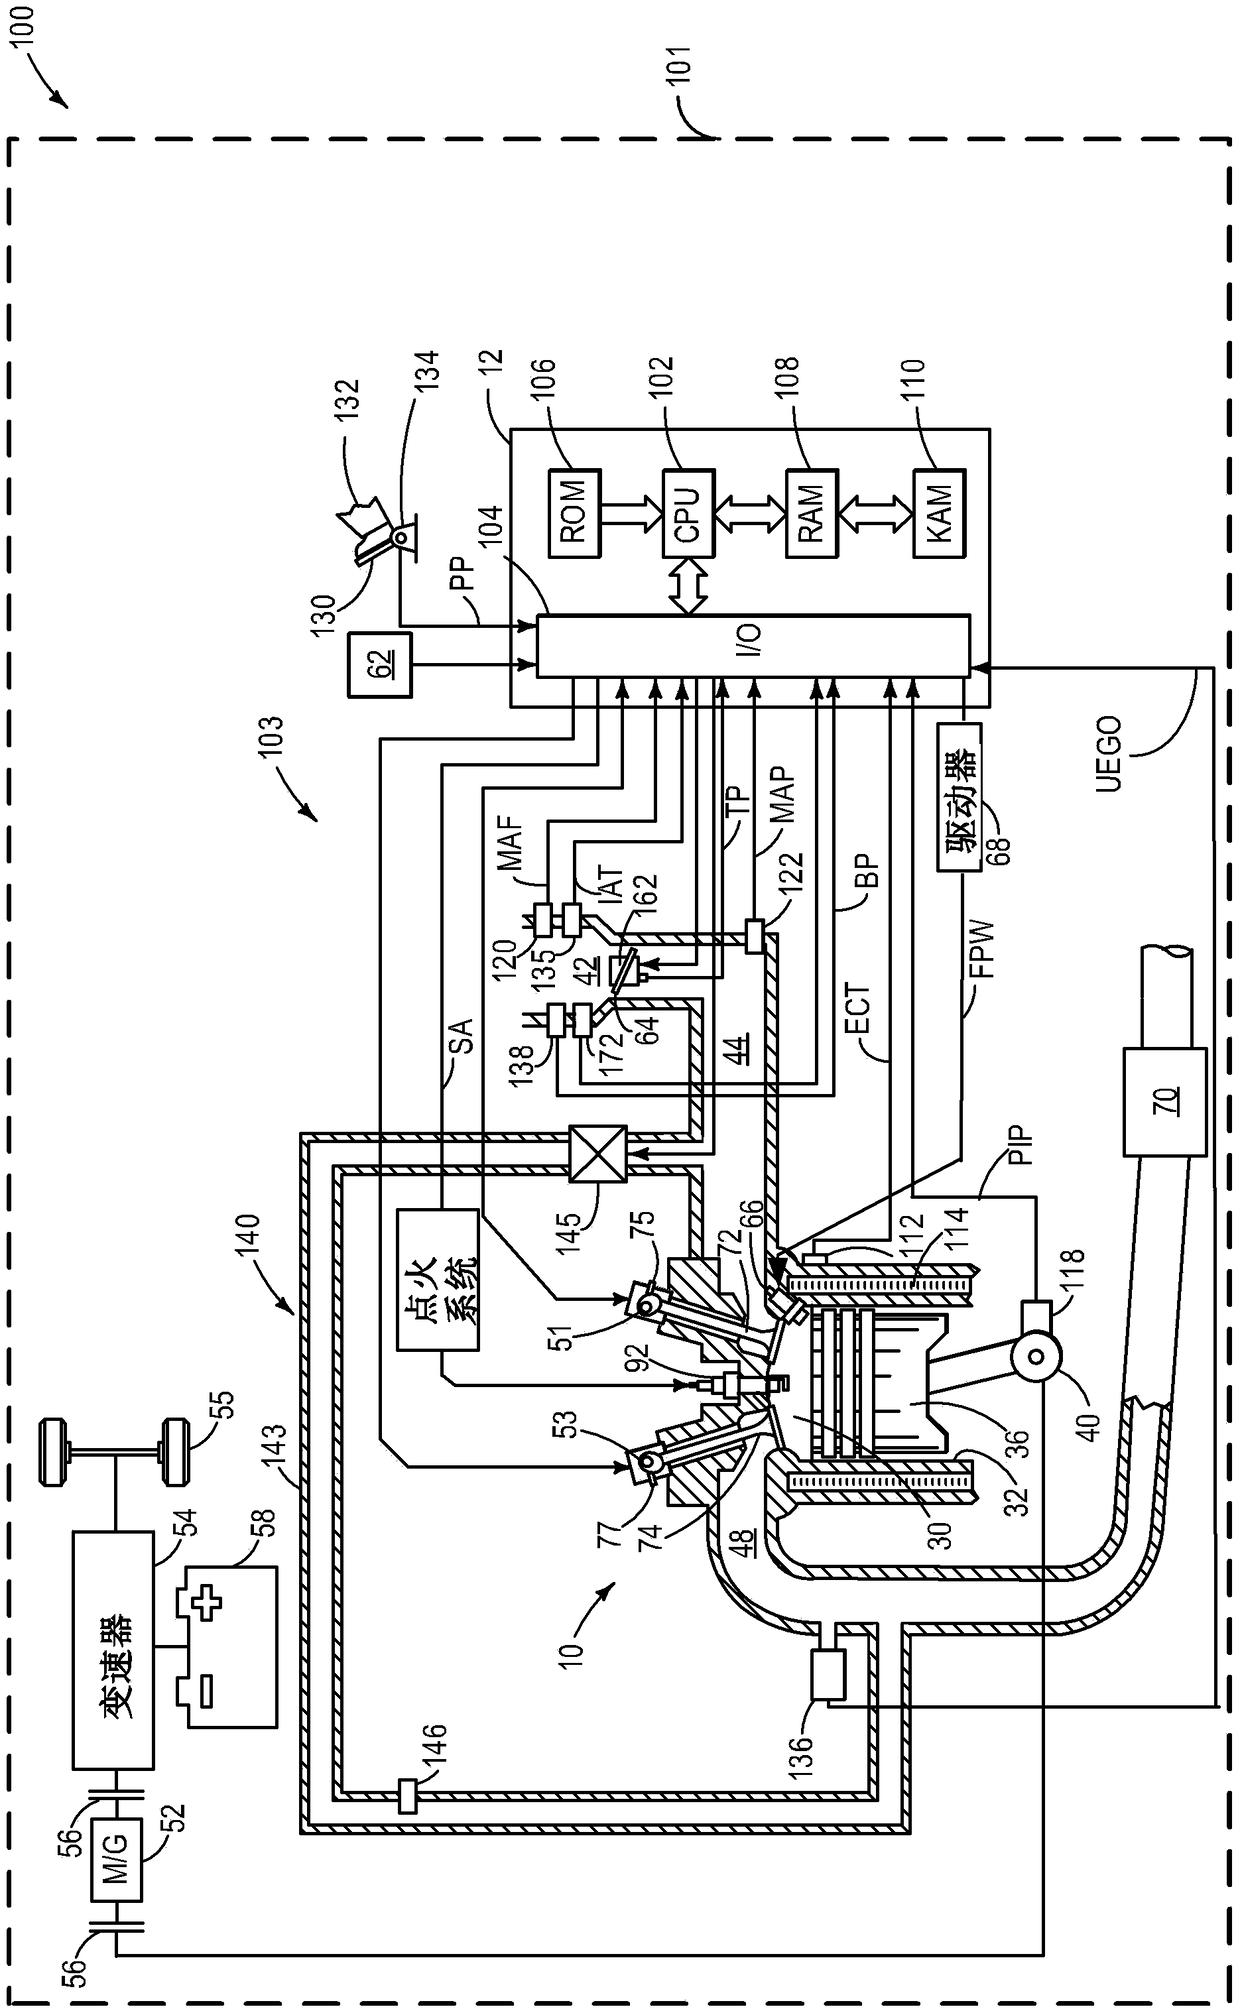 Methods and systems for spark timing control